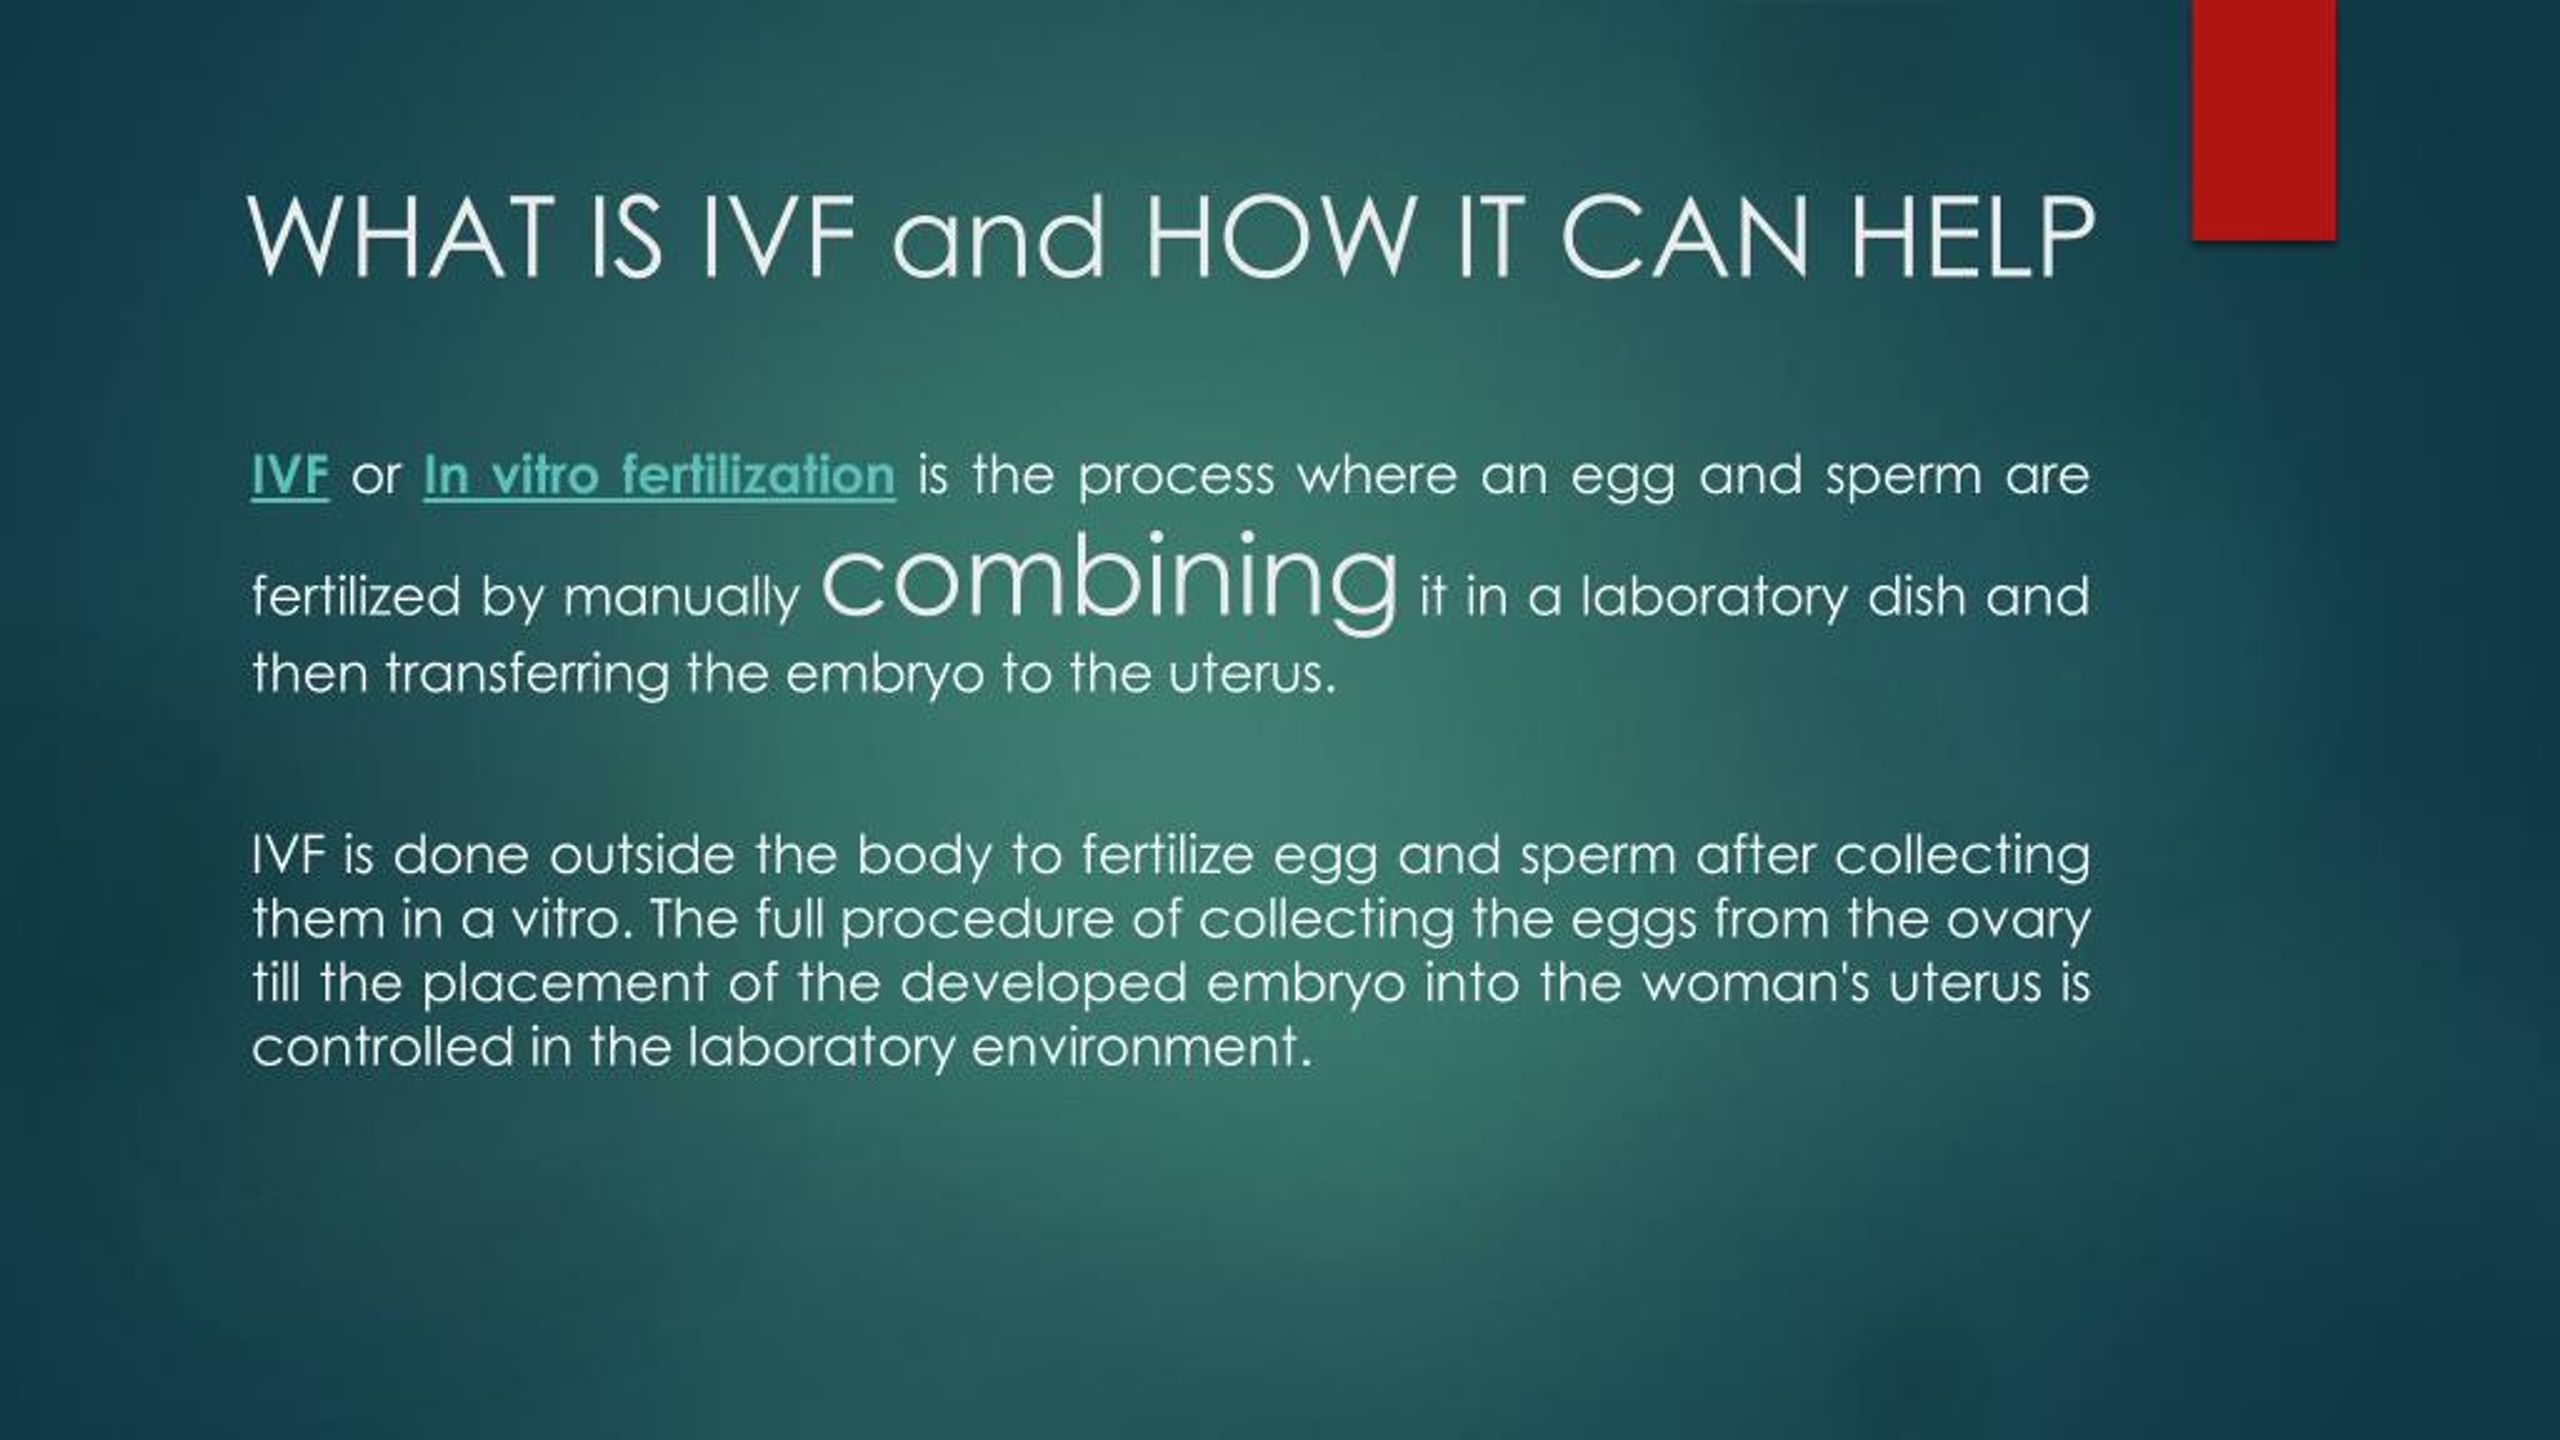 Ppt Ivf In Vitro Fertilization Complete Guide For Hopeless Couples Powerpoint Ppt 5810